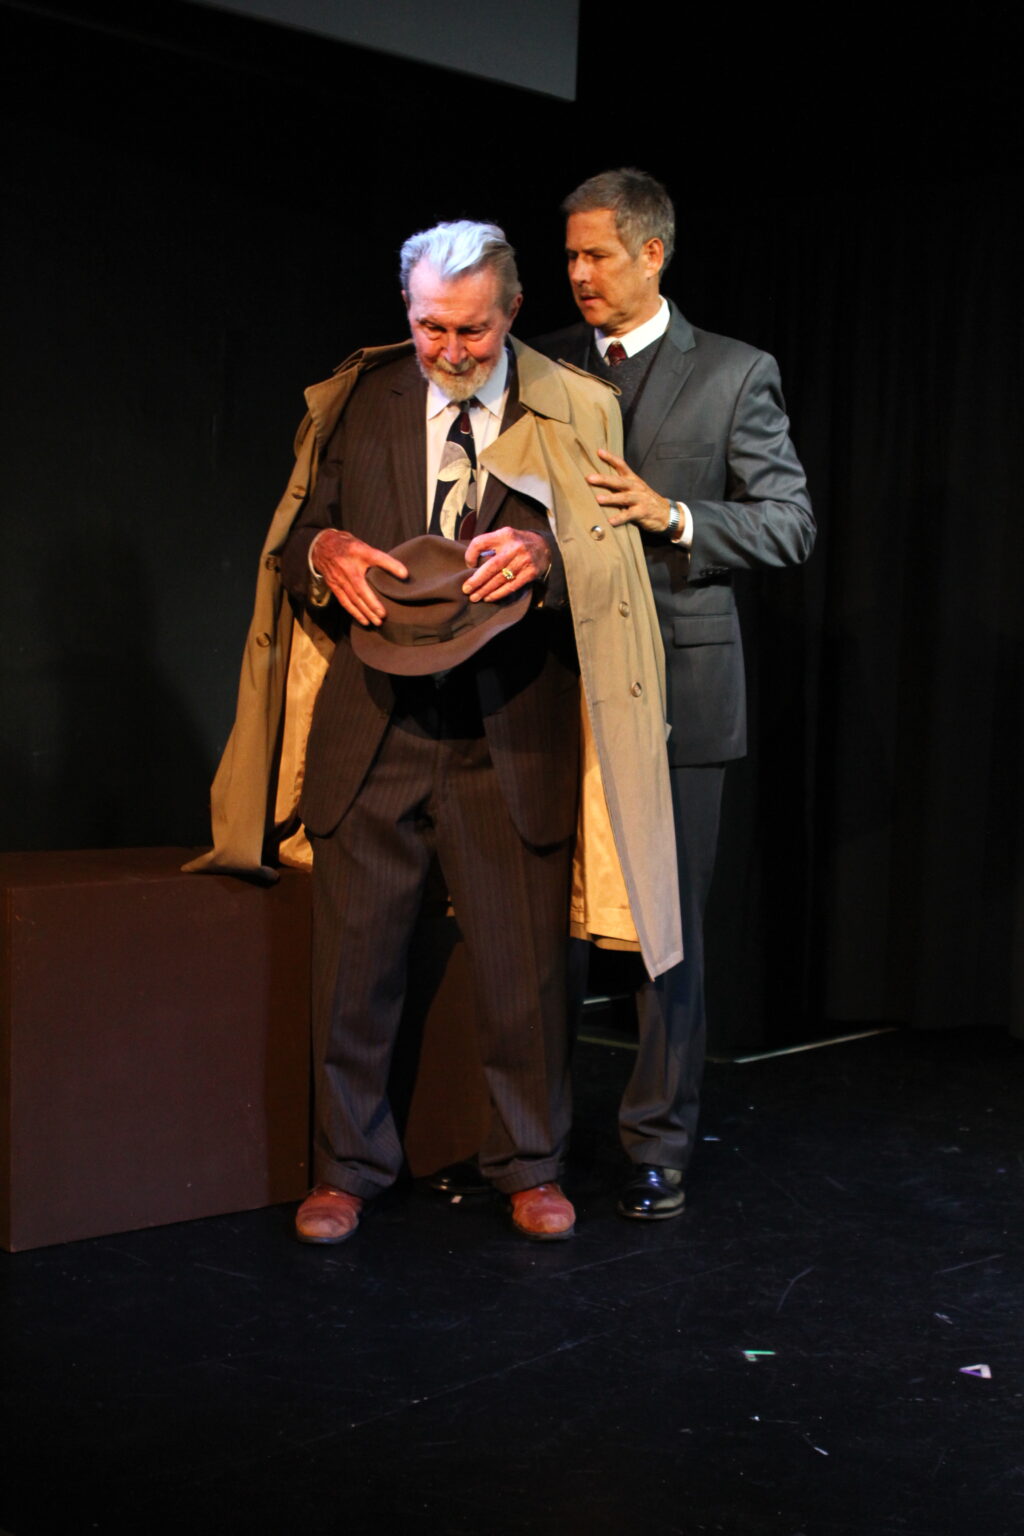 A NoHo Arts theatre review of “I Never Sang For My Father” by award-winning author Robert Anderson, directed by Doug Kaback at Two Roads Theatre